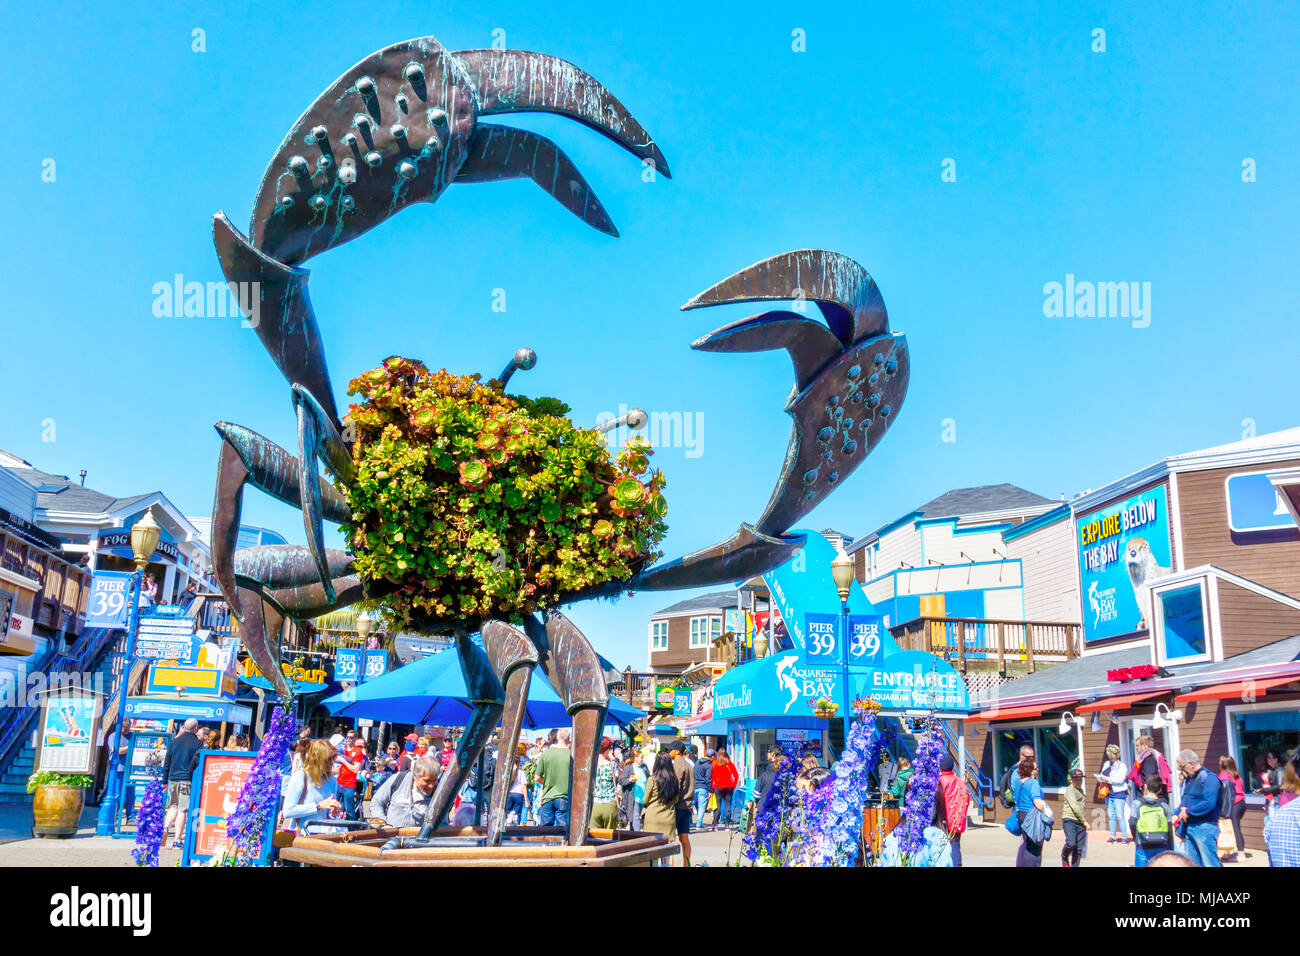 SAN FRANCISCO - APR 2, 2018: Visitors flock to Pier 39 at San Francisco's Fisherman's Wharf renowned for its varied attractions, shops and seafood. Stock Photo